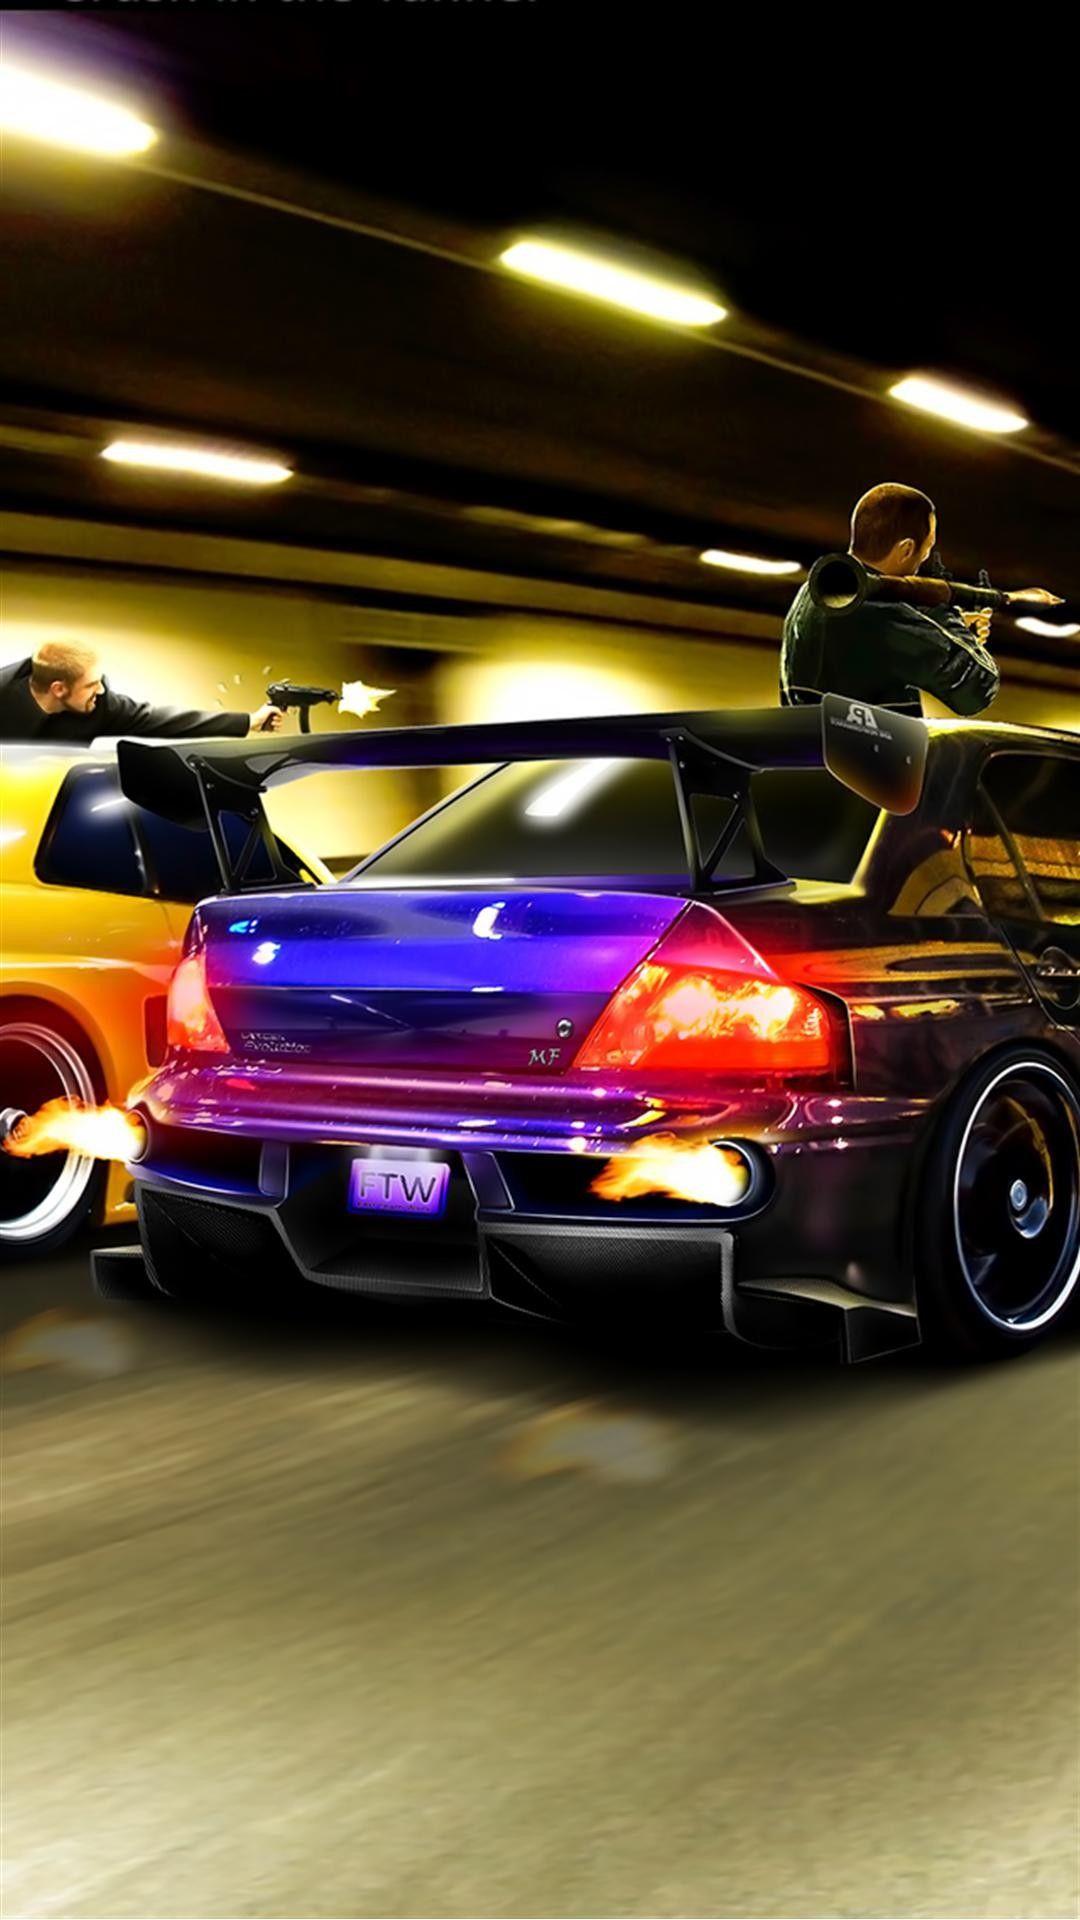 Awesome Cars Wallpaper For Galaxy S4 Full HD Pics Widescreen Best